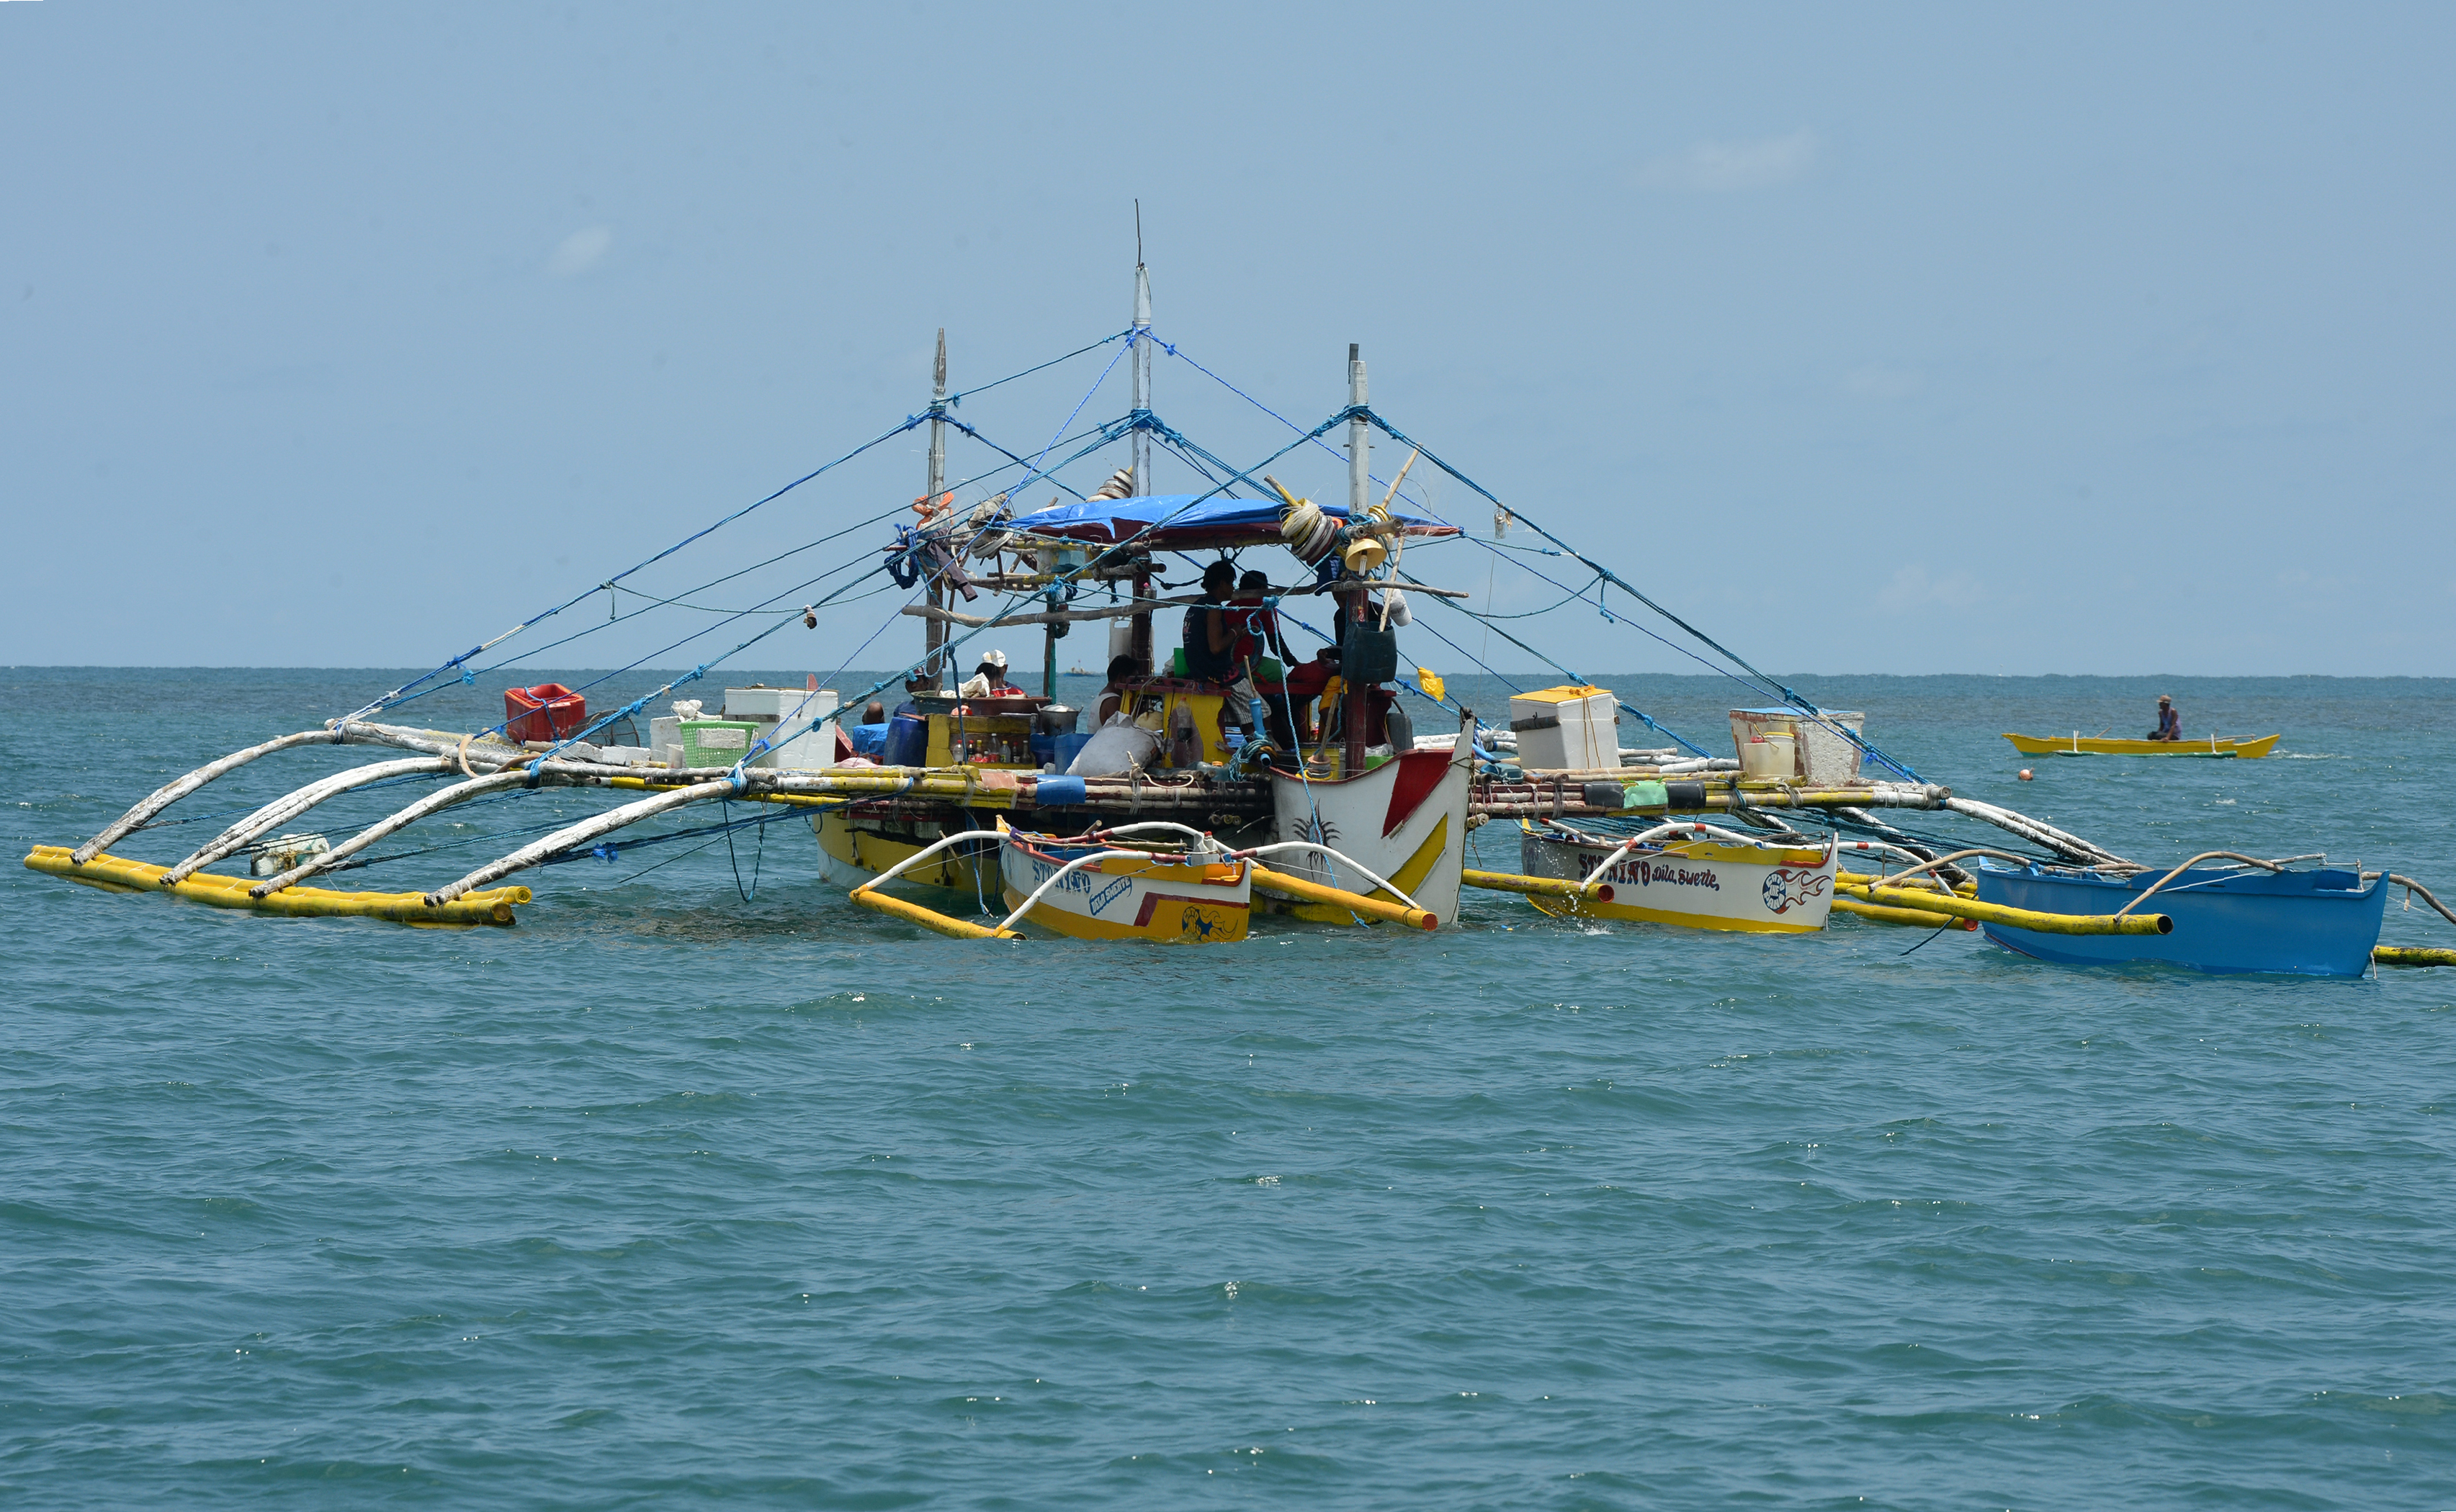 This photo taken on June 16, 2016 shows a fishing vessel anchored at the mouth of the South China Sea off the town of Infanta in Pangasinan province, as they wait for their fishing expedition to Scarborough Shoal. A recent incident at the nearby Scarborough Shoal, a necklace of reefs and rocks some 230 kilometres (140 miles) off the main Philippine island of Luzon that Filipino fishermen say hosts some of the world's most abundant marine life, is part of a long-running territorial row that sits at the heart of a UN backed tribunal expected to rule in the coming weeks. / AFP PHOTO / TED ALJIBE / TO GO WITH Philippines-China-UN-maritime-diplomacy-fishing,FOCUS by Cecil Morella